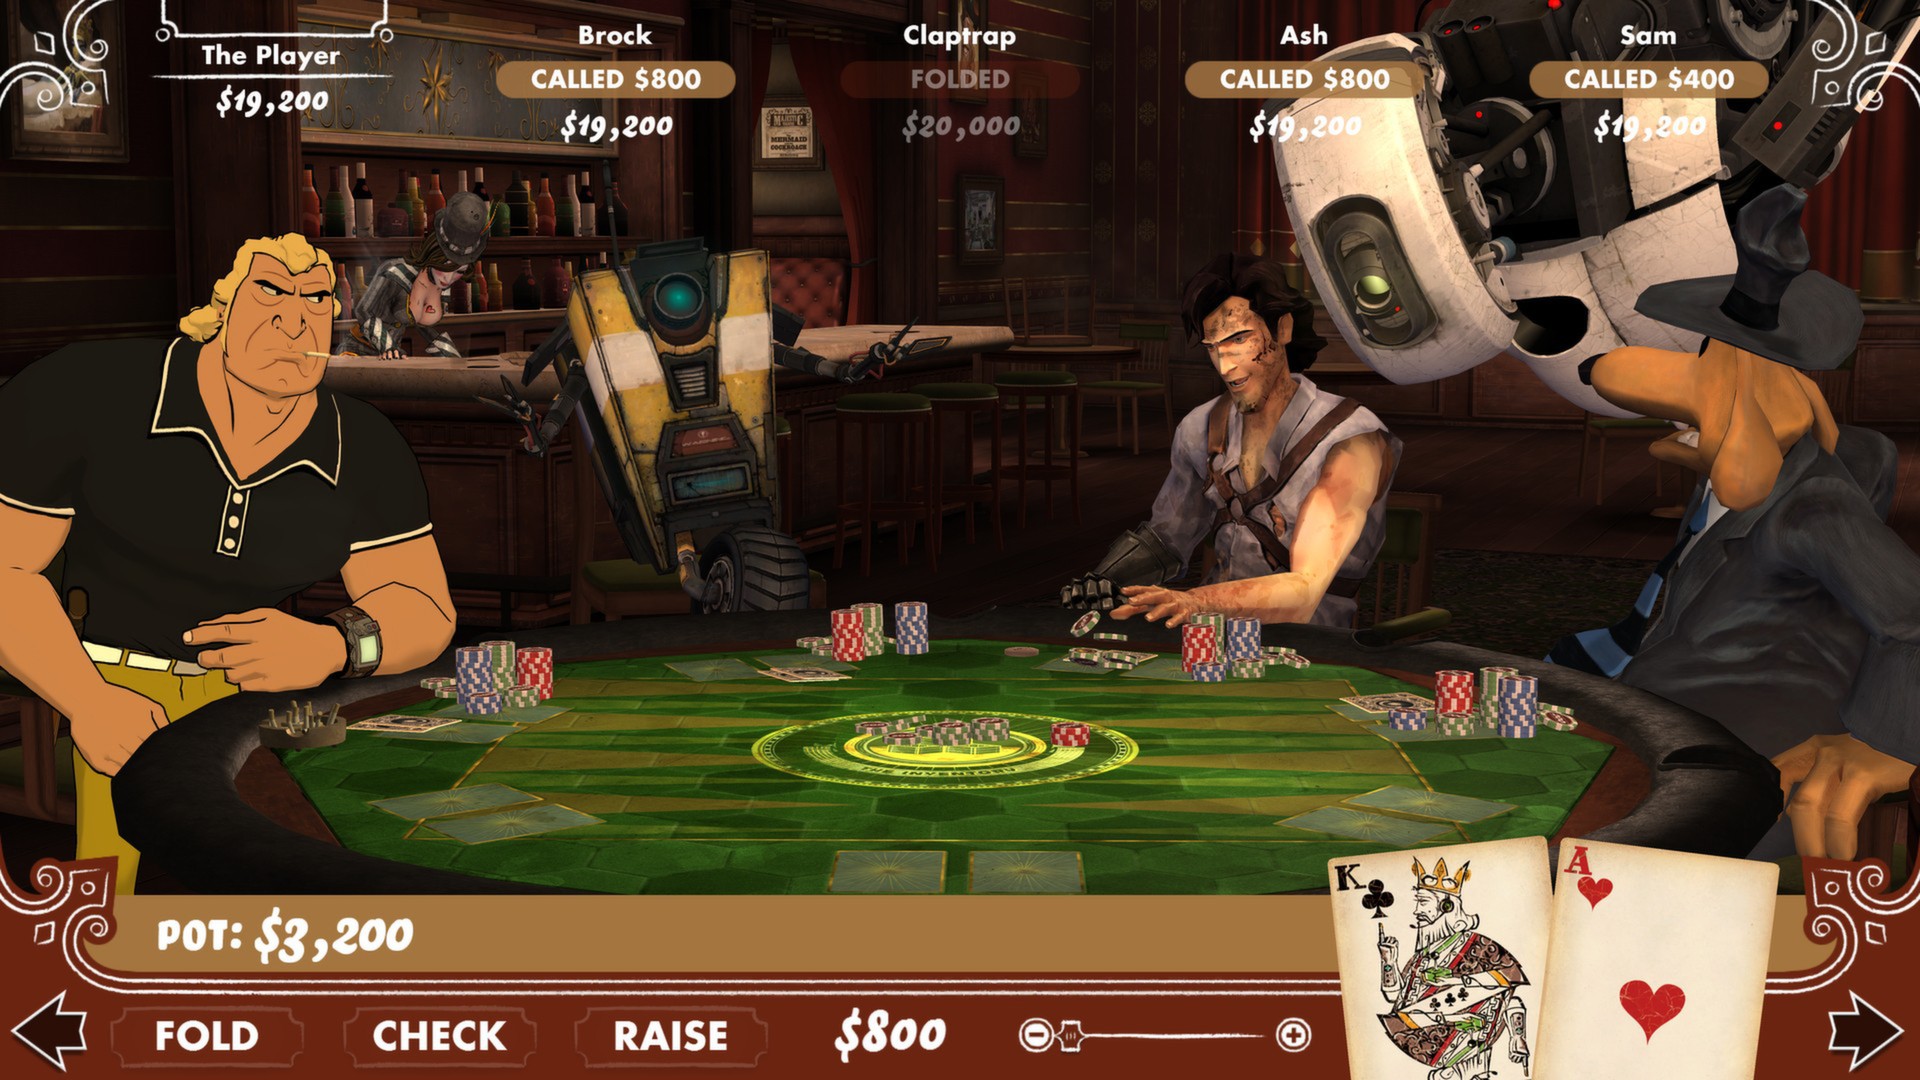 Save 75% on Poker Night 2 - Buy and download on GamersGate